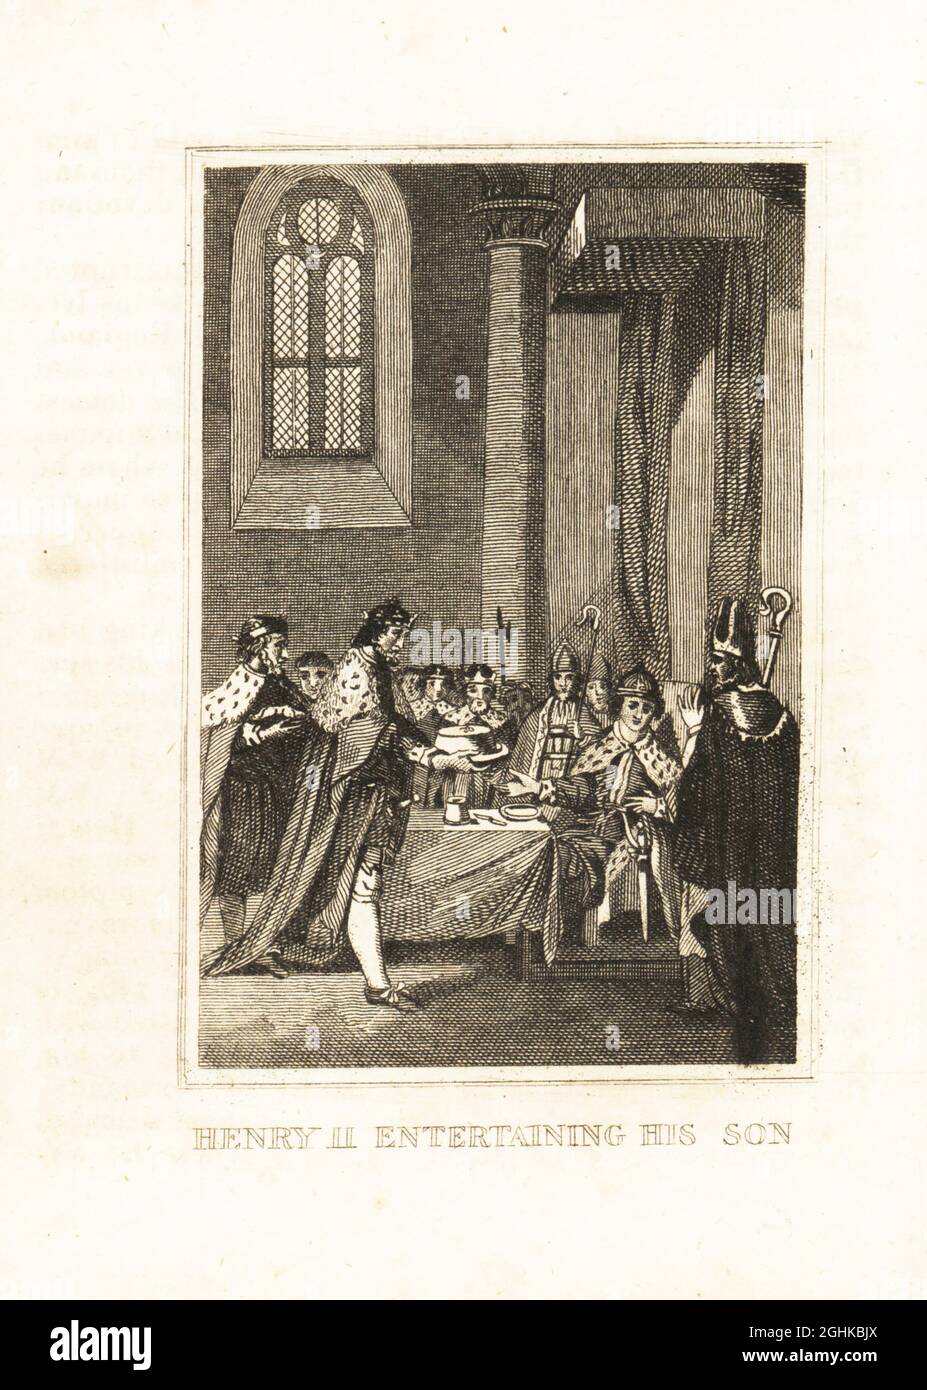 Henry the Young King at his coronation banquet, 1170. His father King Henry II serves him a dish, while bishops and nobles in ermine watch. Henry II entertaining his son. Copperplate engraving from M. A. Jones’ History of England from Julius Caesar to George IV, G. Virtue, 26 Ivy Lane, London, 1836. Stock Photo